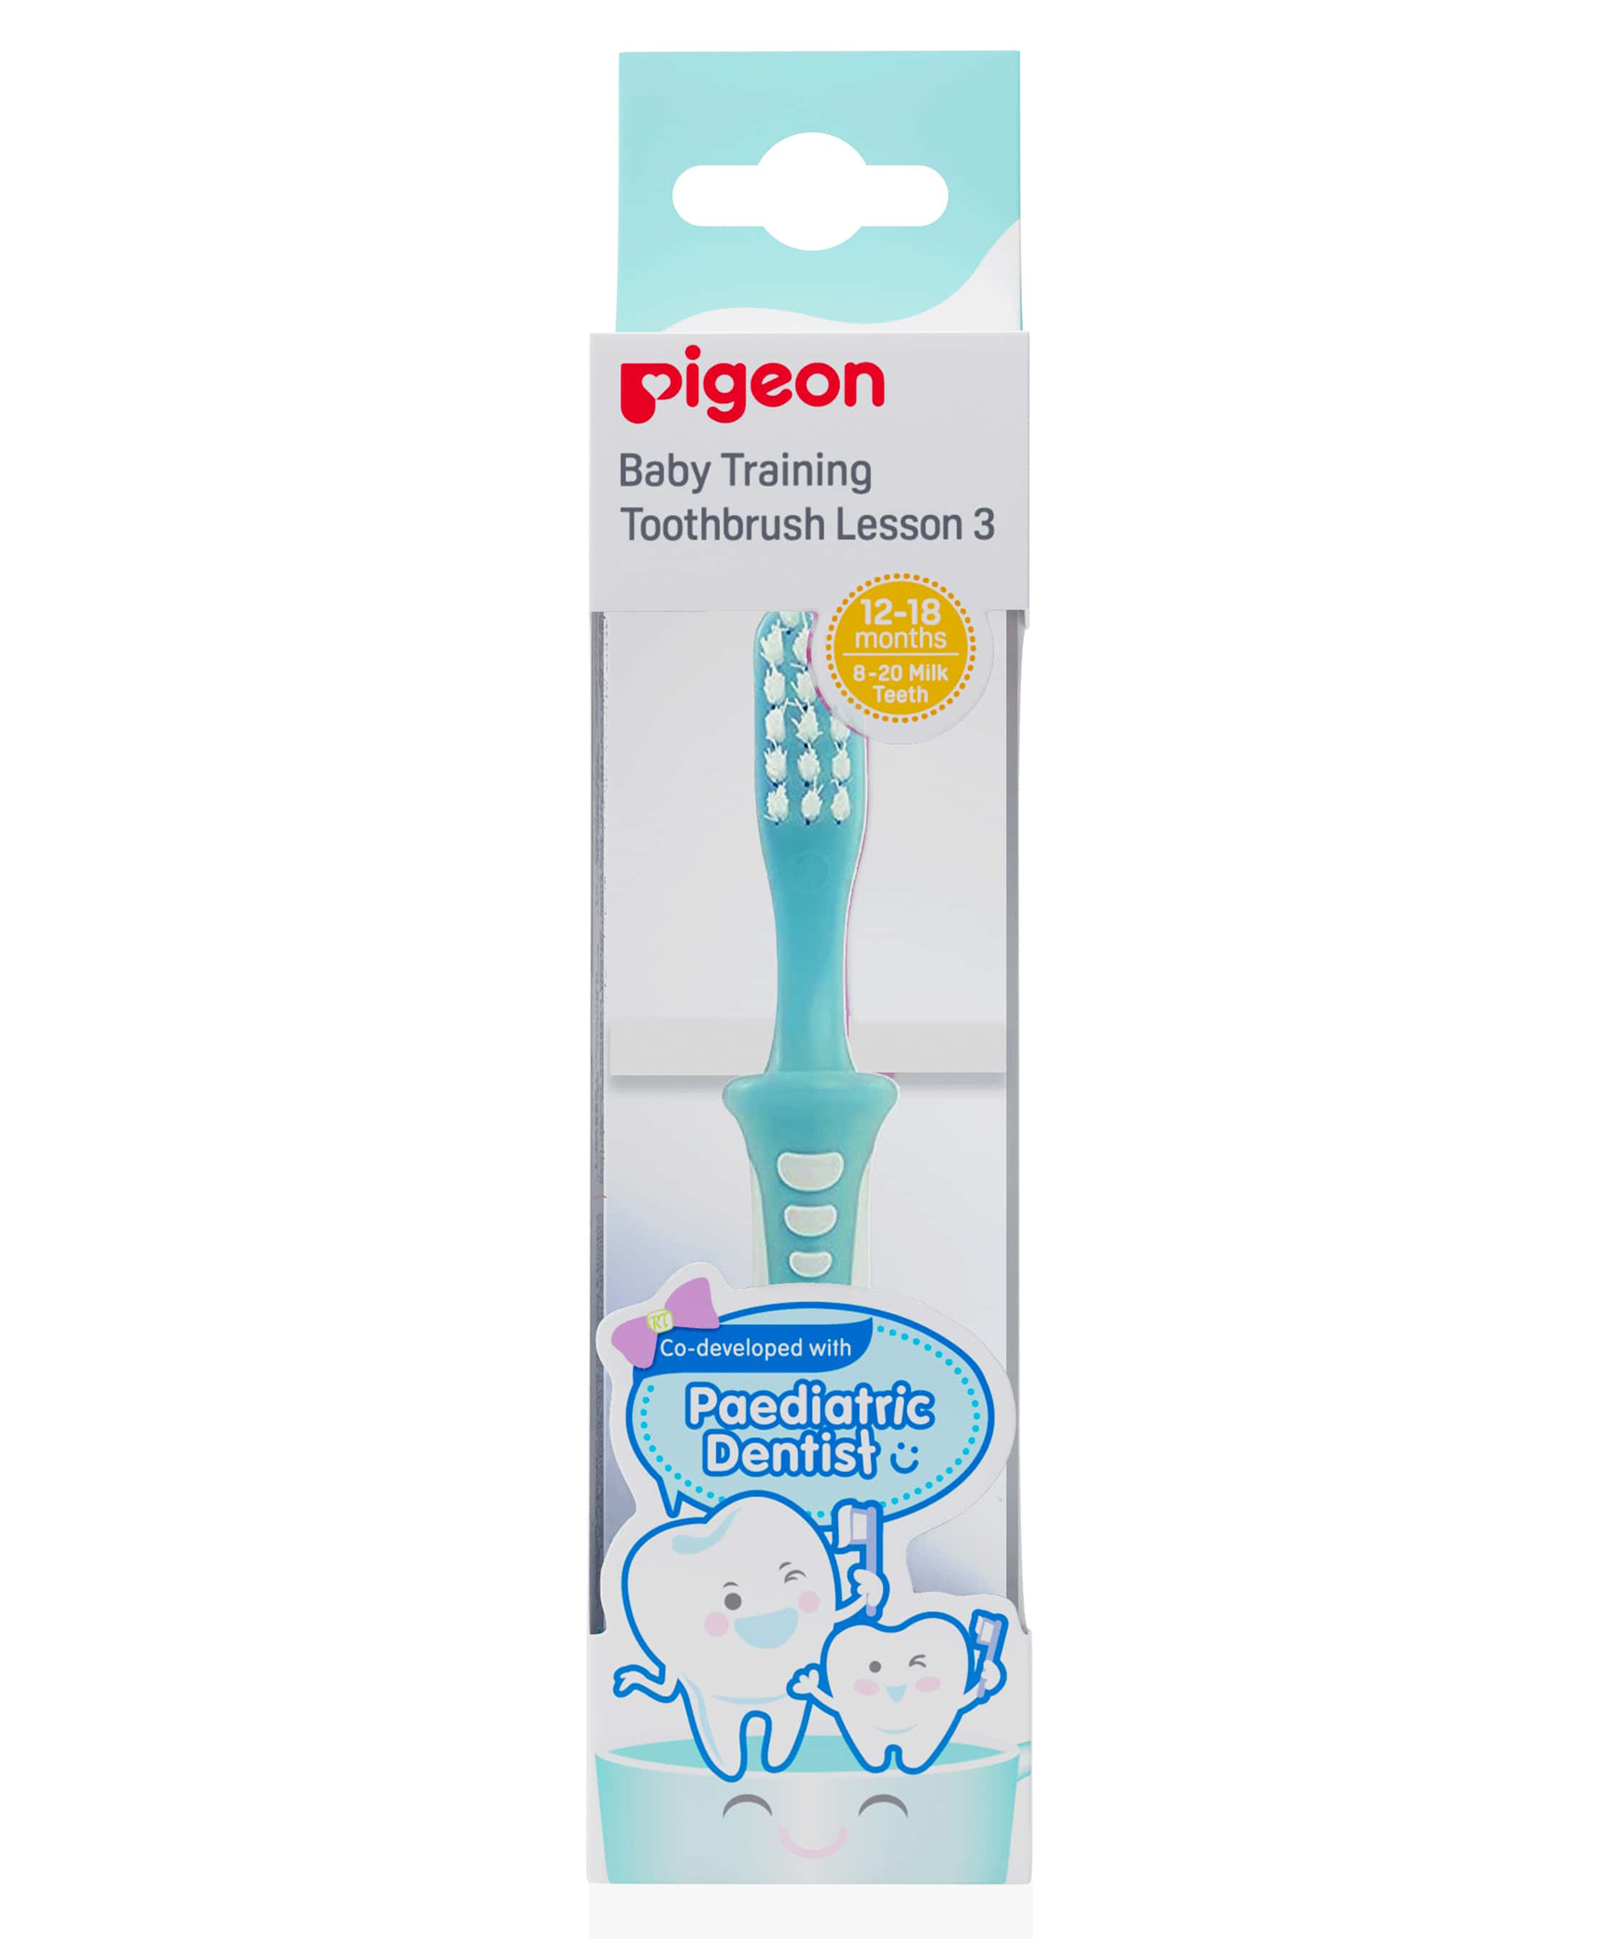 Pigeon - Baby Training Toothbrush (Lesson 3)